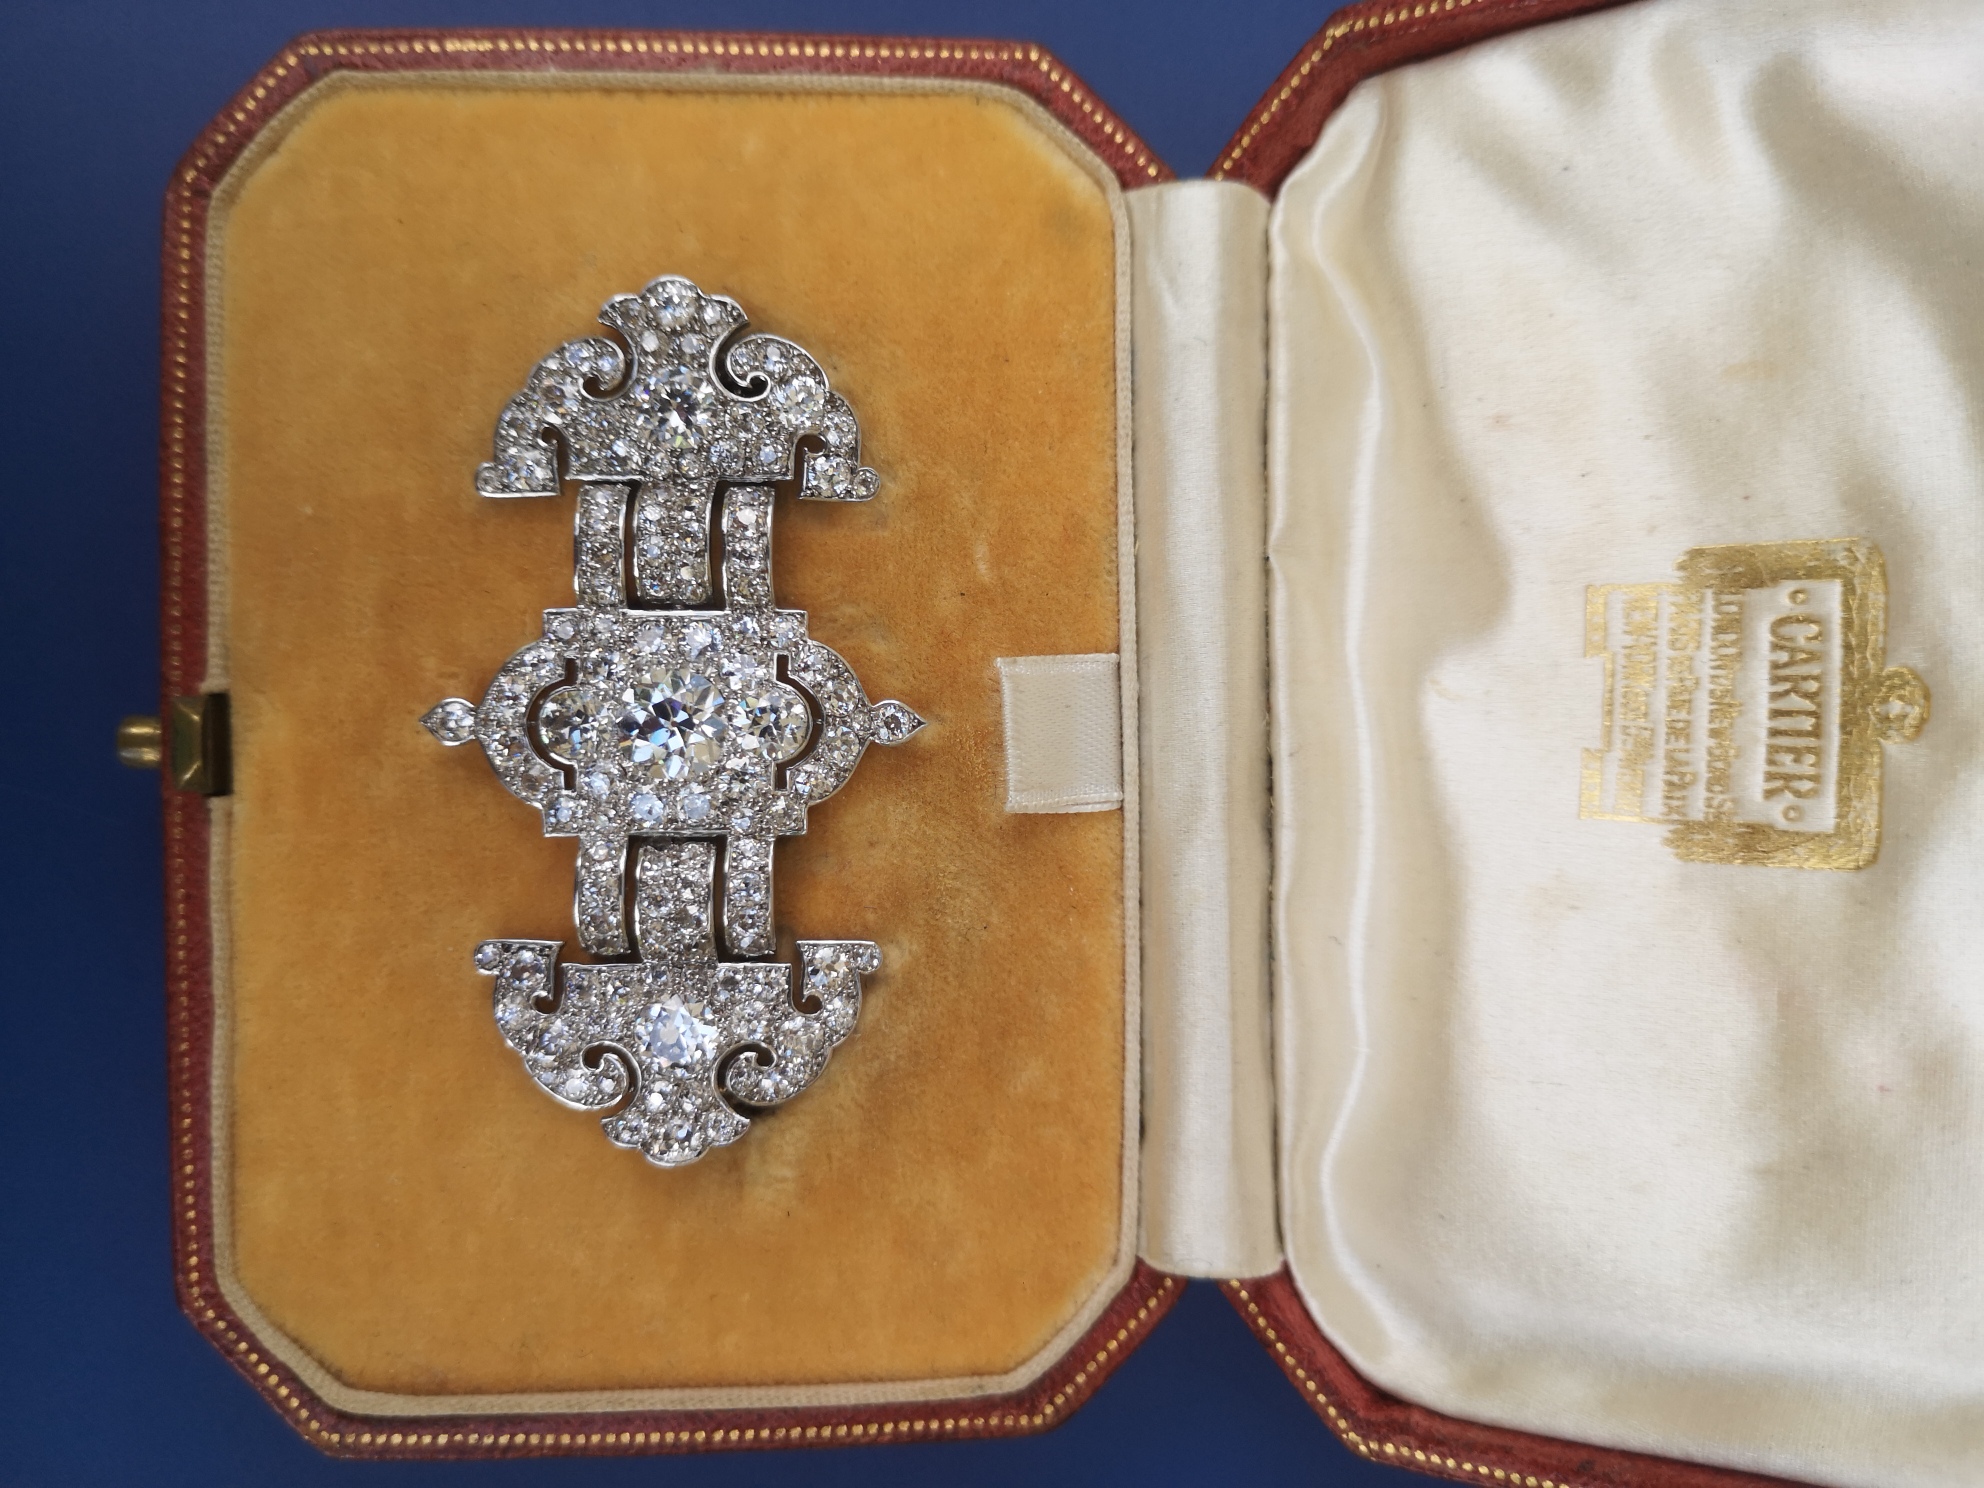 Art deco diamond set platinum brooch unsigned, fitted into a Cartier box, sold for £13,000